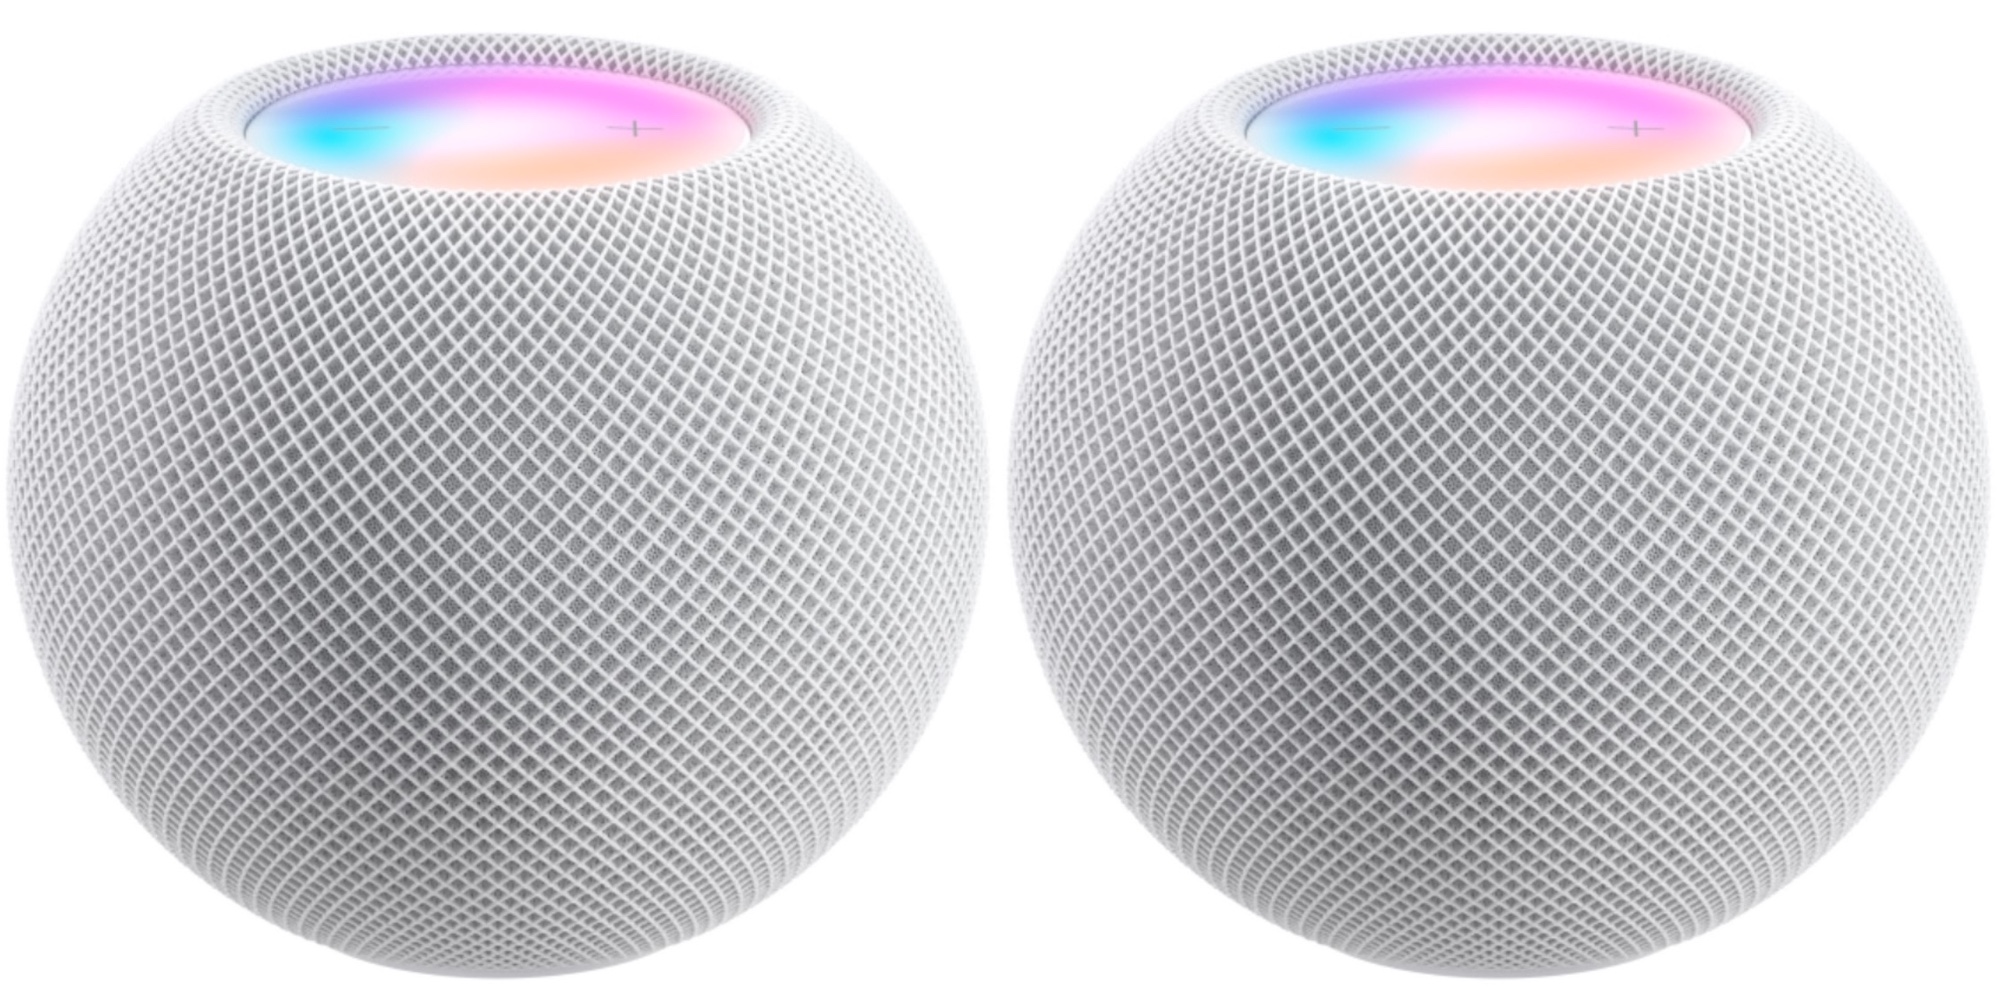 How to Stereo Pair HomePod Mini Speakers